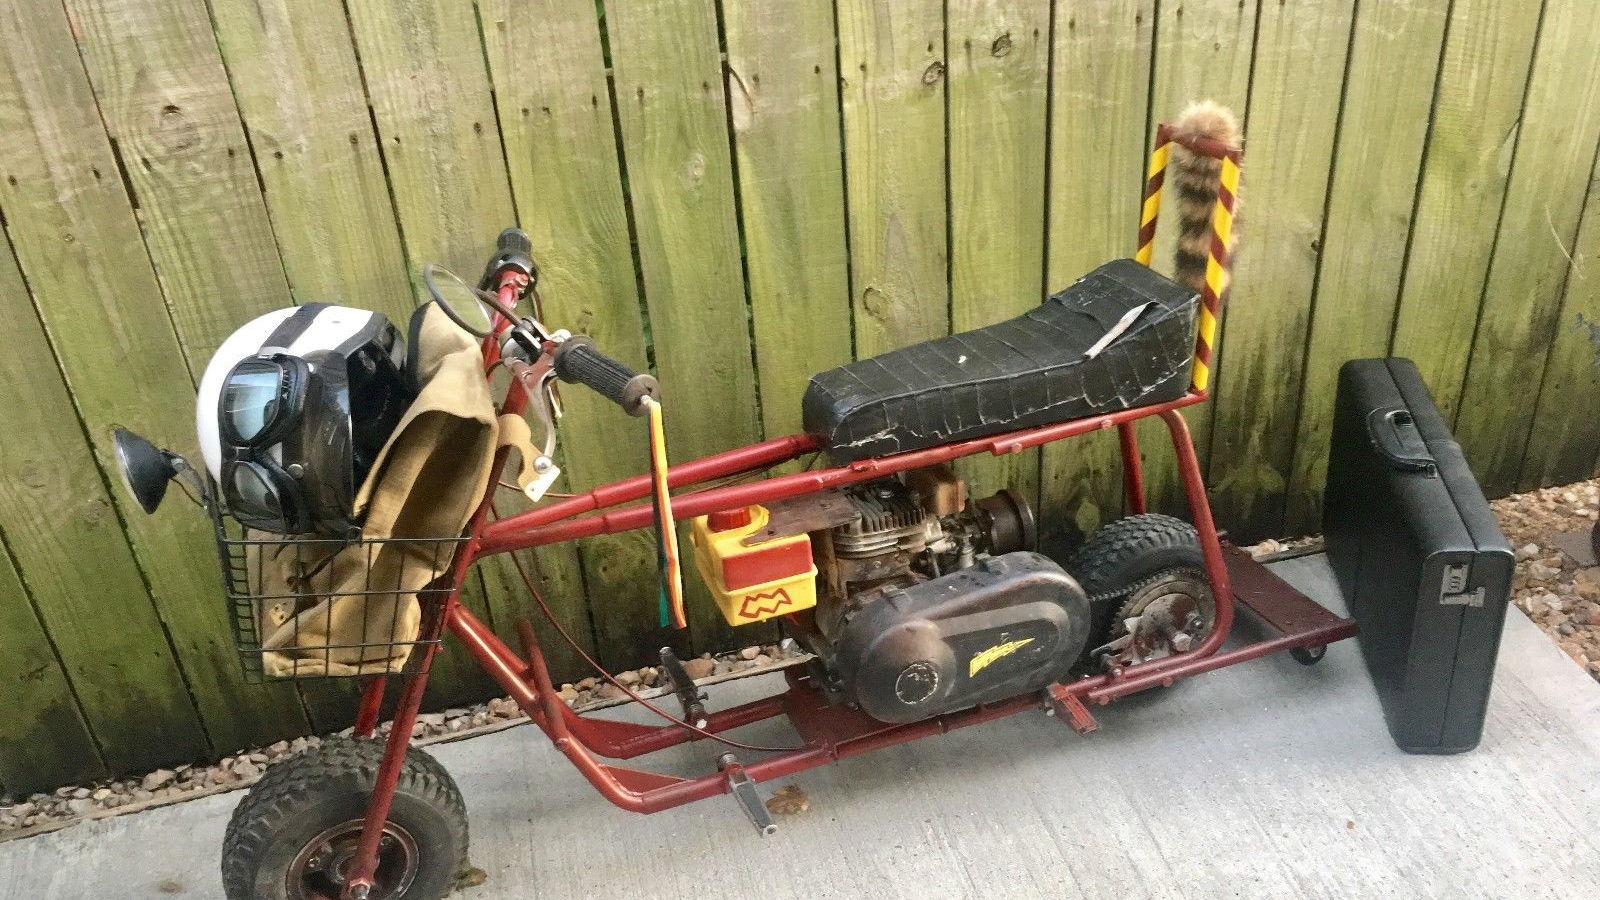 The original Dumb and Dumber mini bike is up for sale